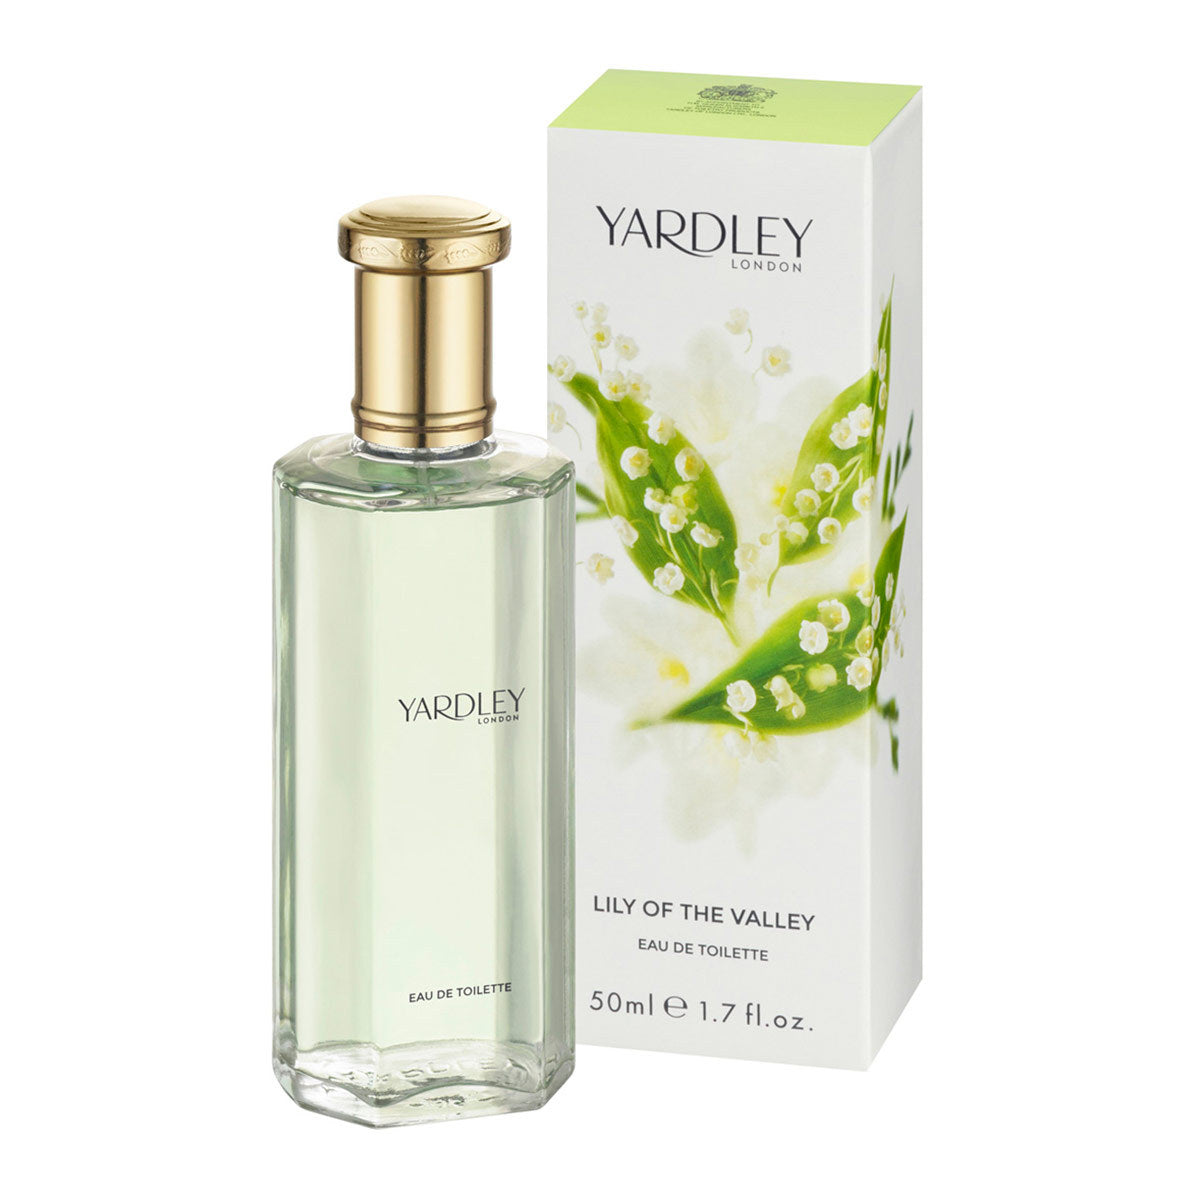 African Lily of The Valley - 1 oz